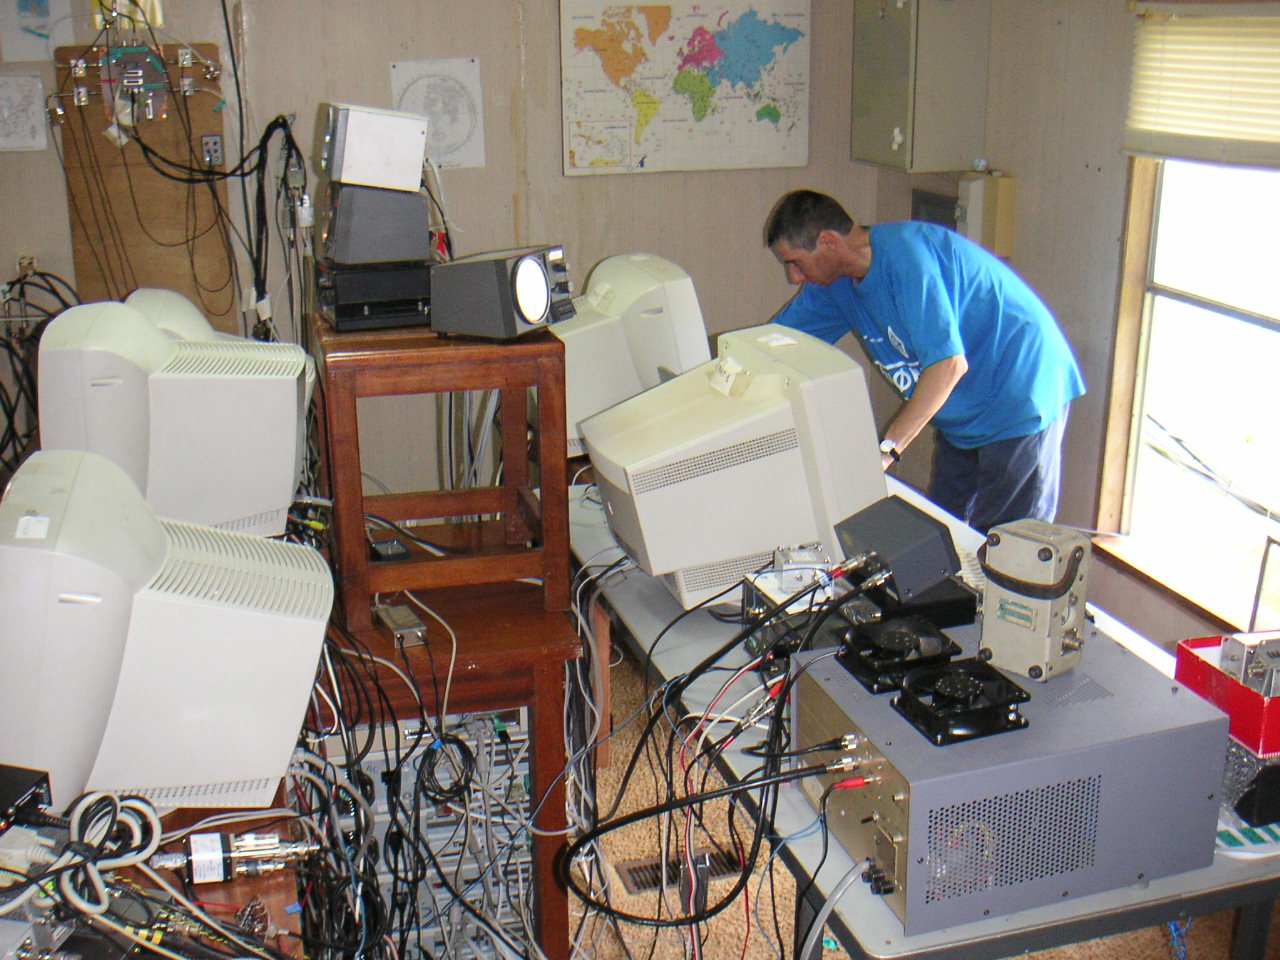 F6FVY setting up the network View 2004